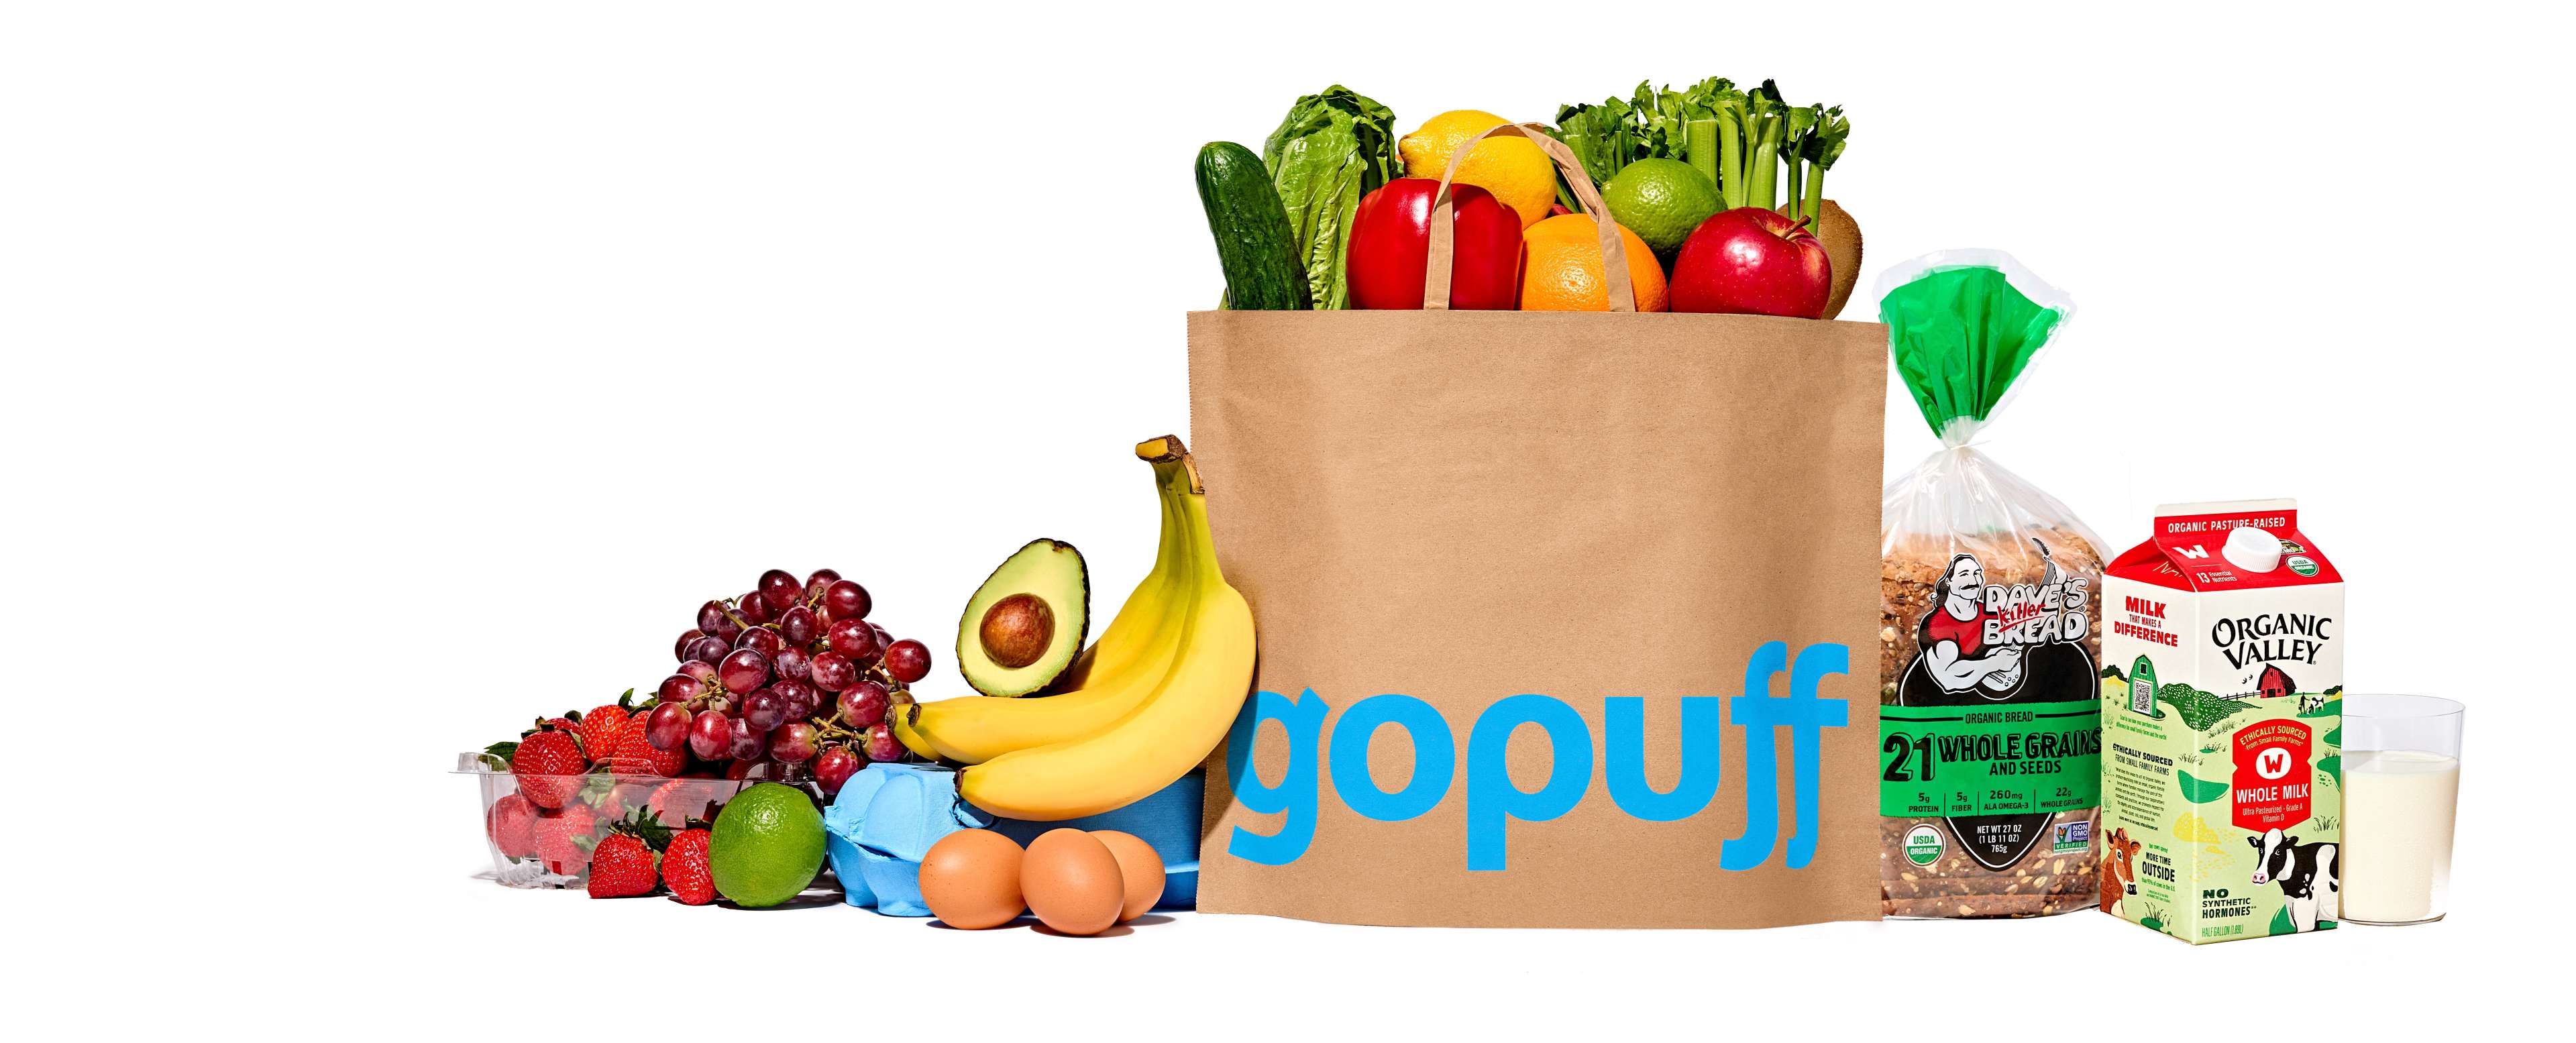 Gopuff bag surrounded by fresh produce, bread and dairy products.